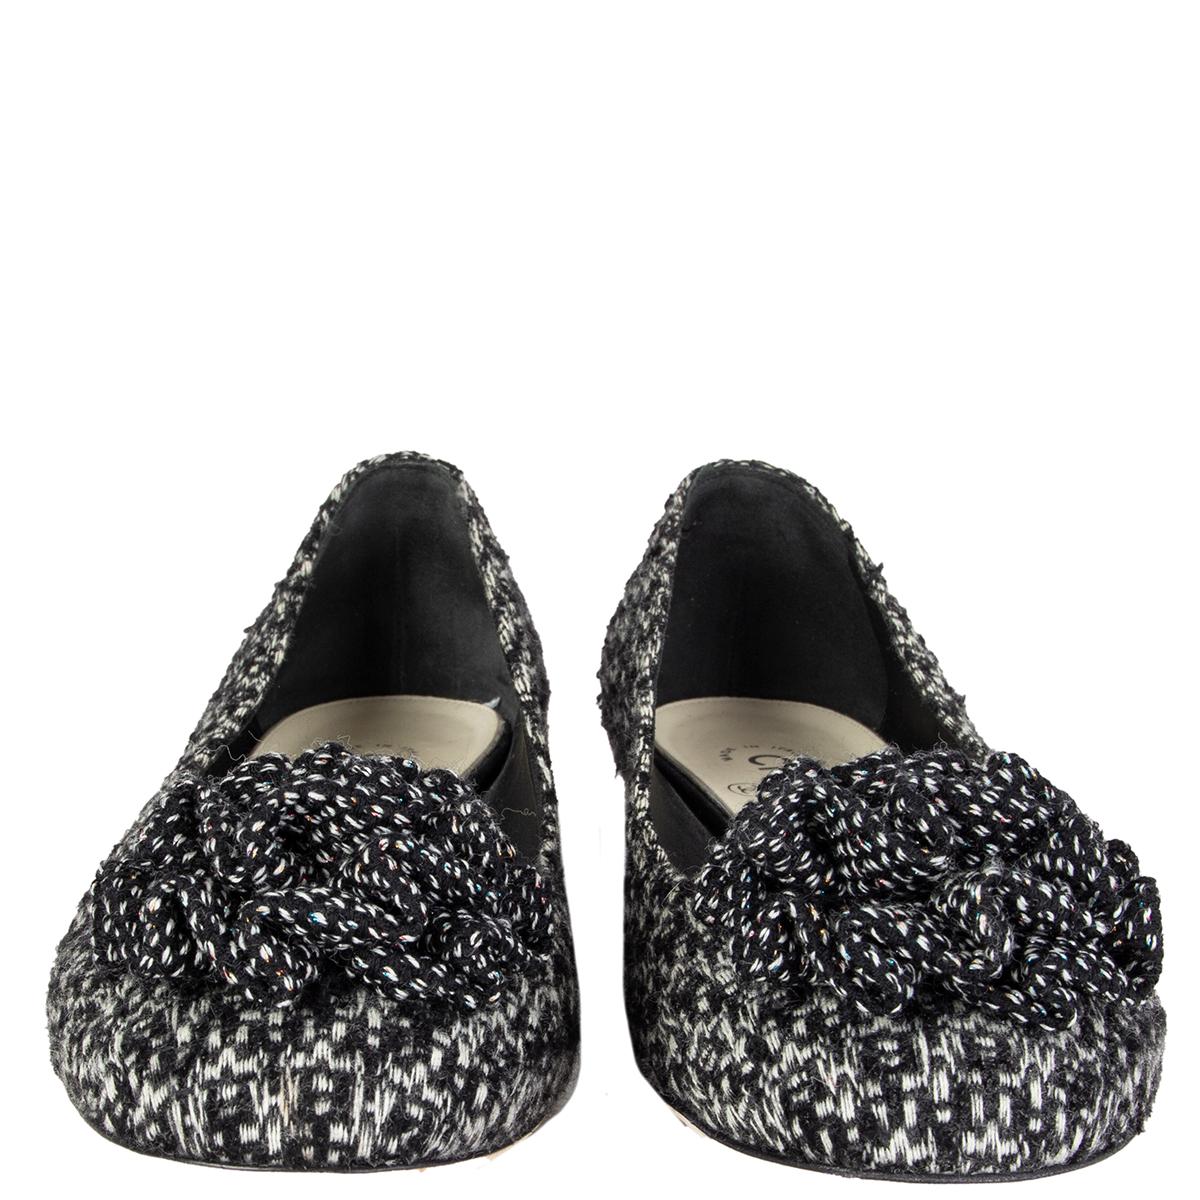 100% authentic Chanel block heel flats in black and off-white bouclé with blossom pom-pom on top. Have been worn once and are in virtually new condition. 

Measurements
Imprinted Size	40
Shoe Size	40
Inside Sole	26cm (10.1in)
Width	8cm